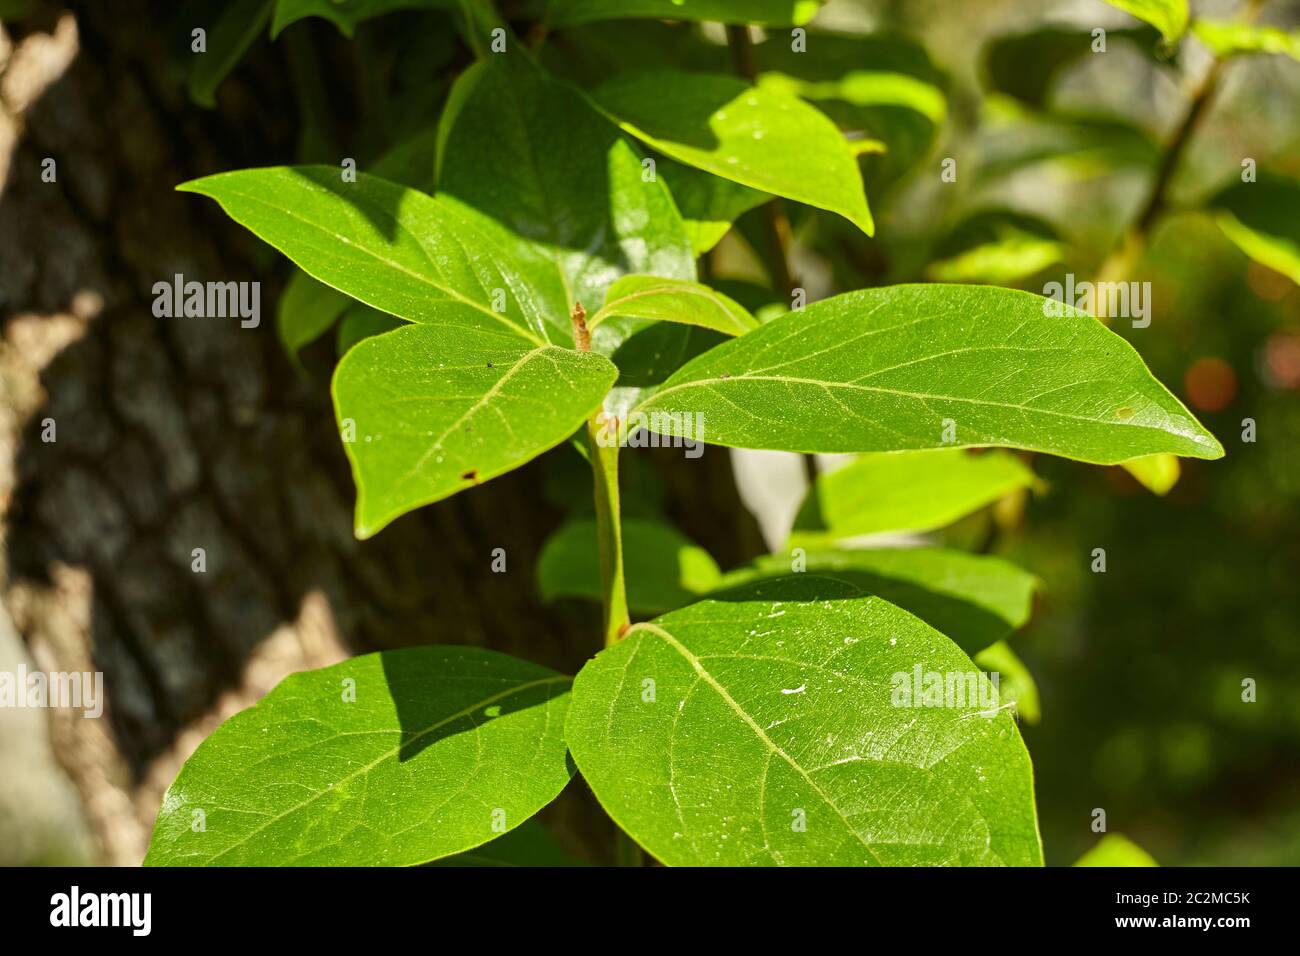 Detail of some leaves of the caco tree, the details of the leaf itself with its veins are clearly visible. Stock Photo